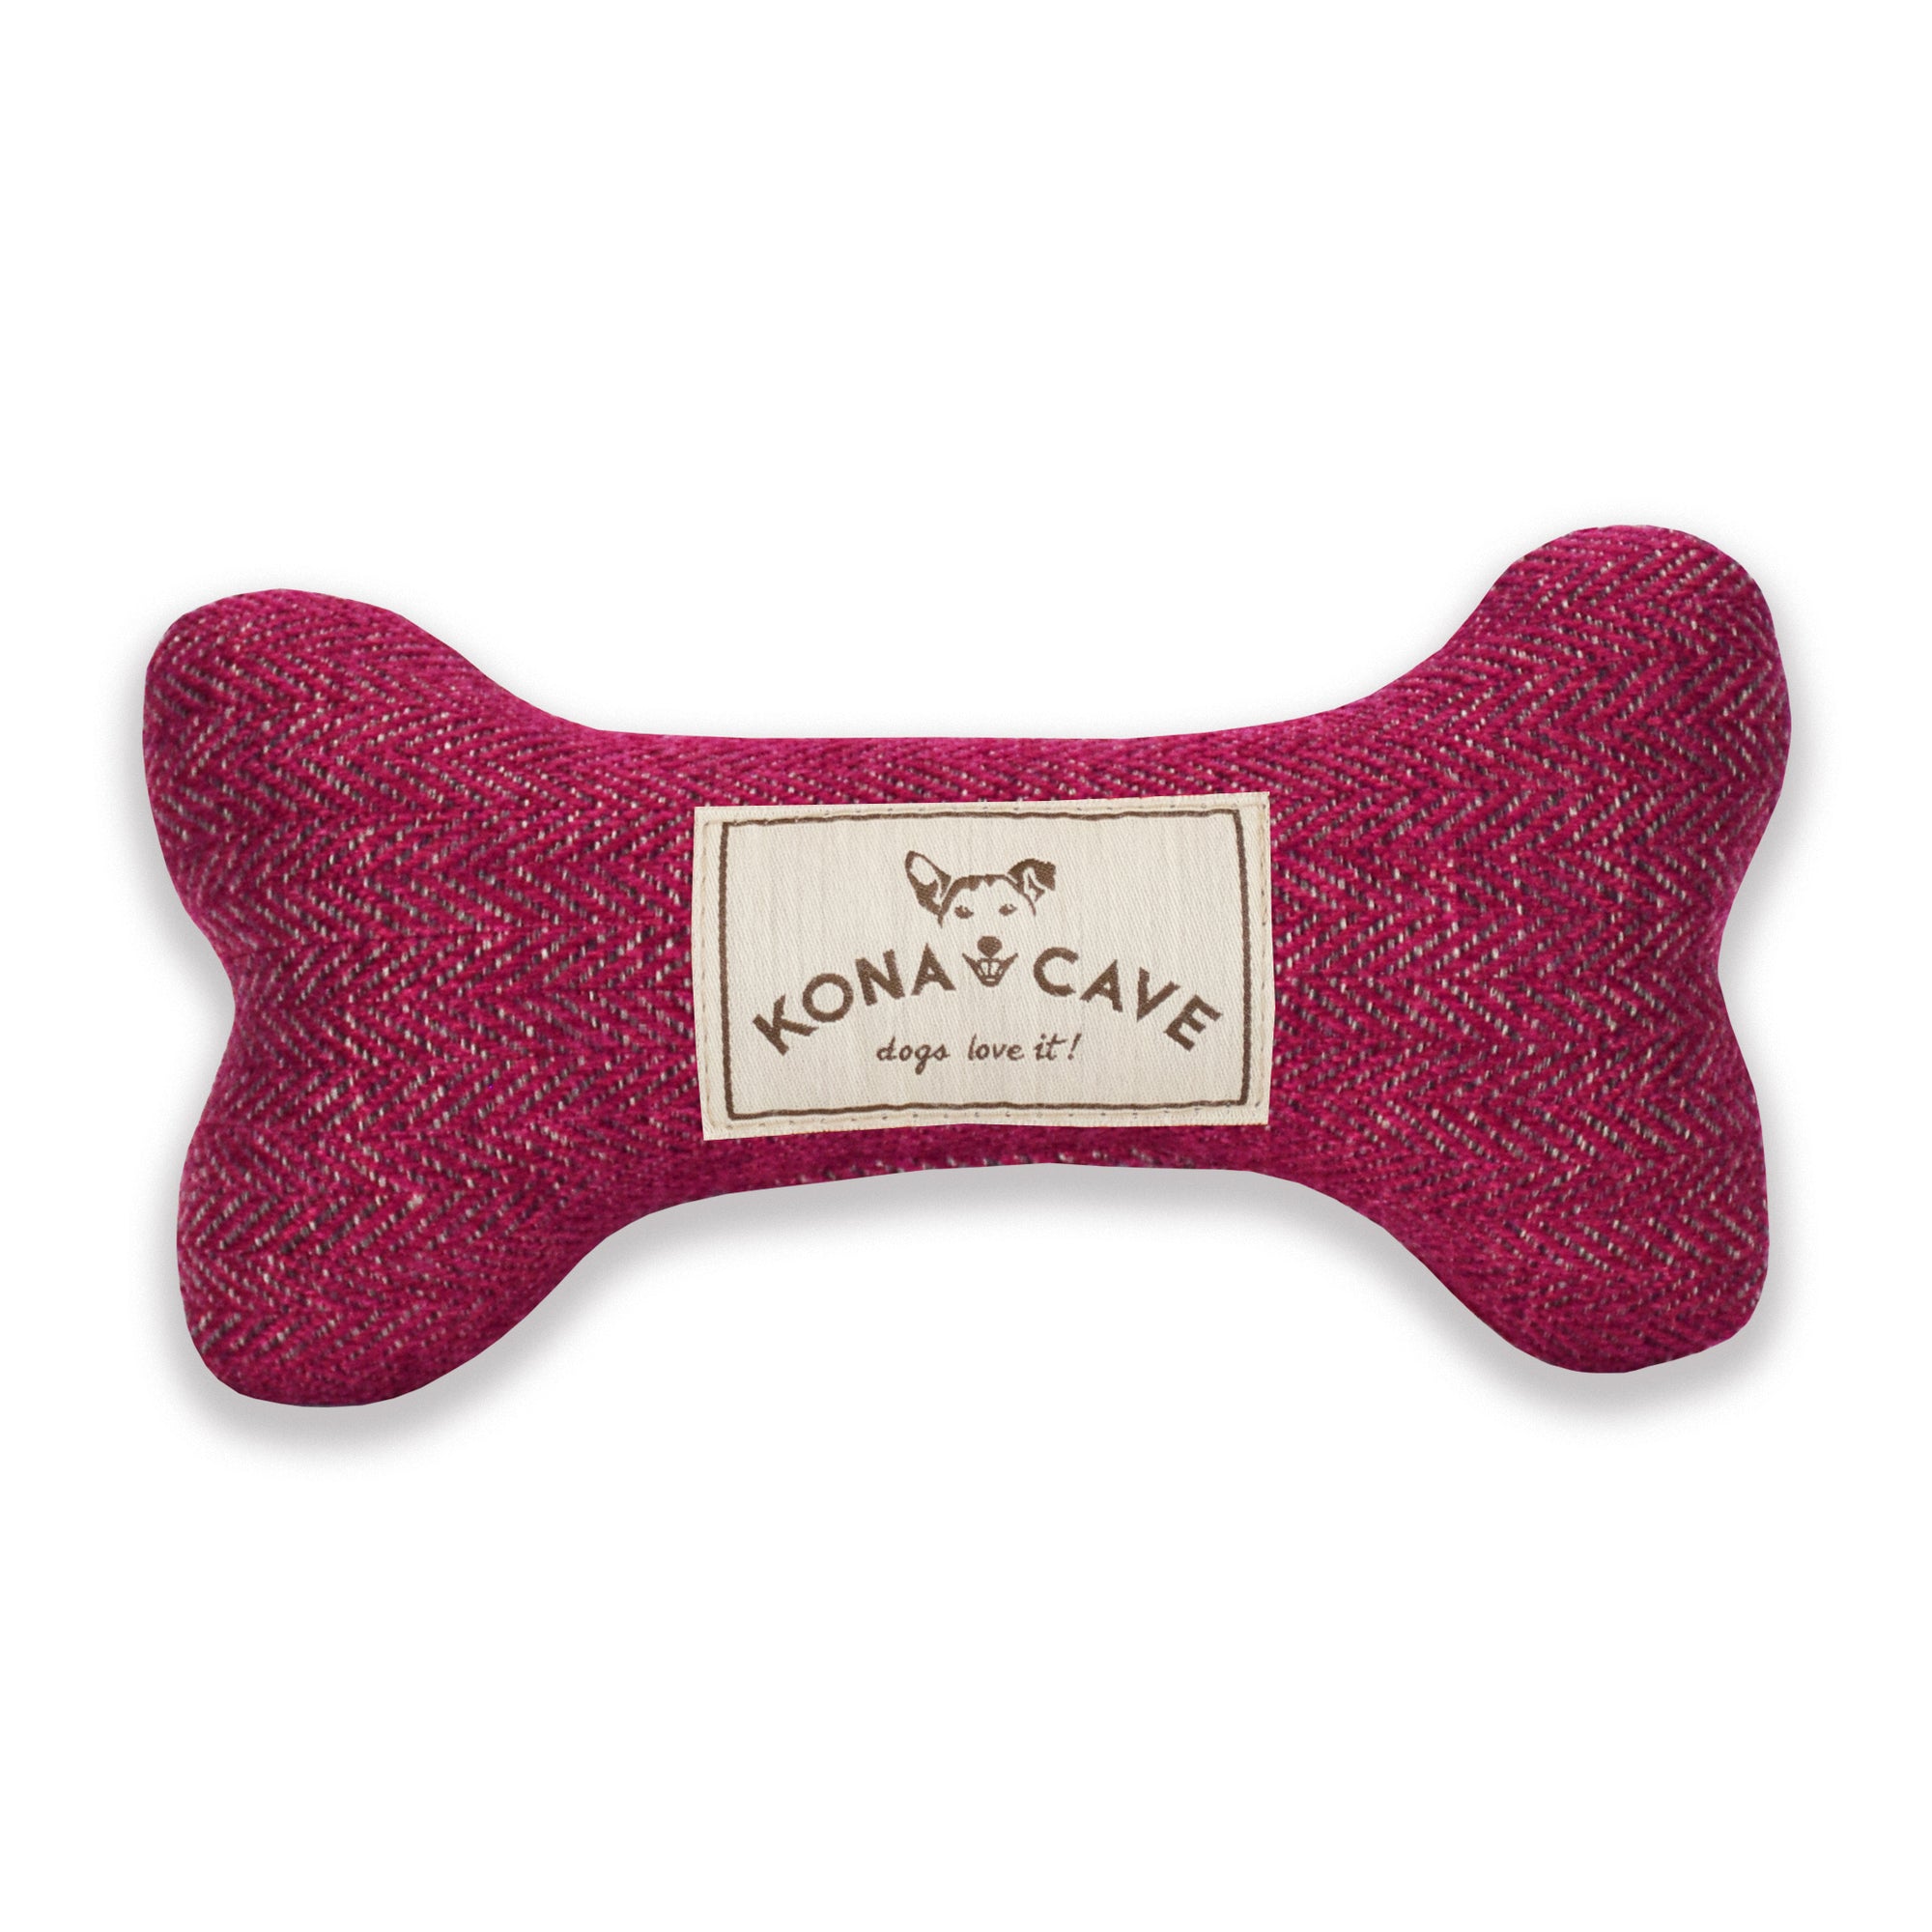 Magenta pink herringbone plush toy bone for dogs and cats and people too!